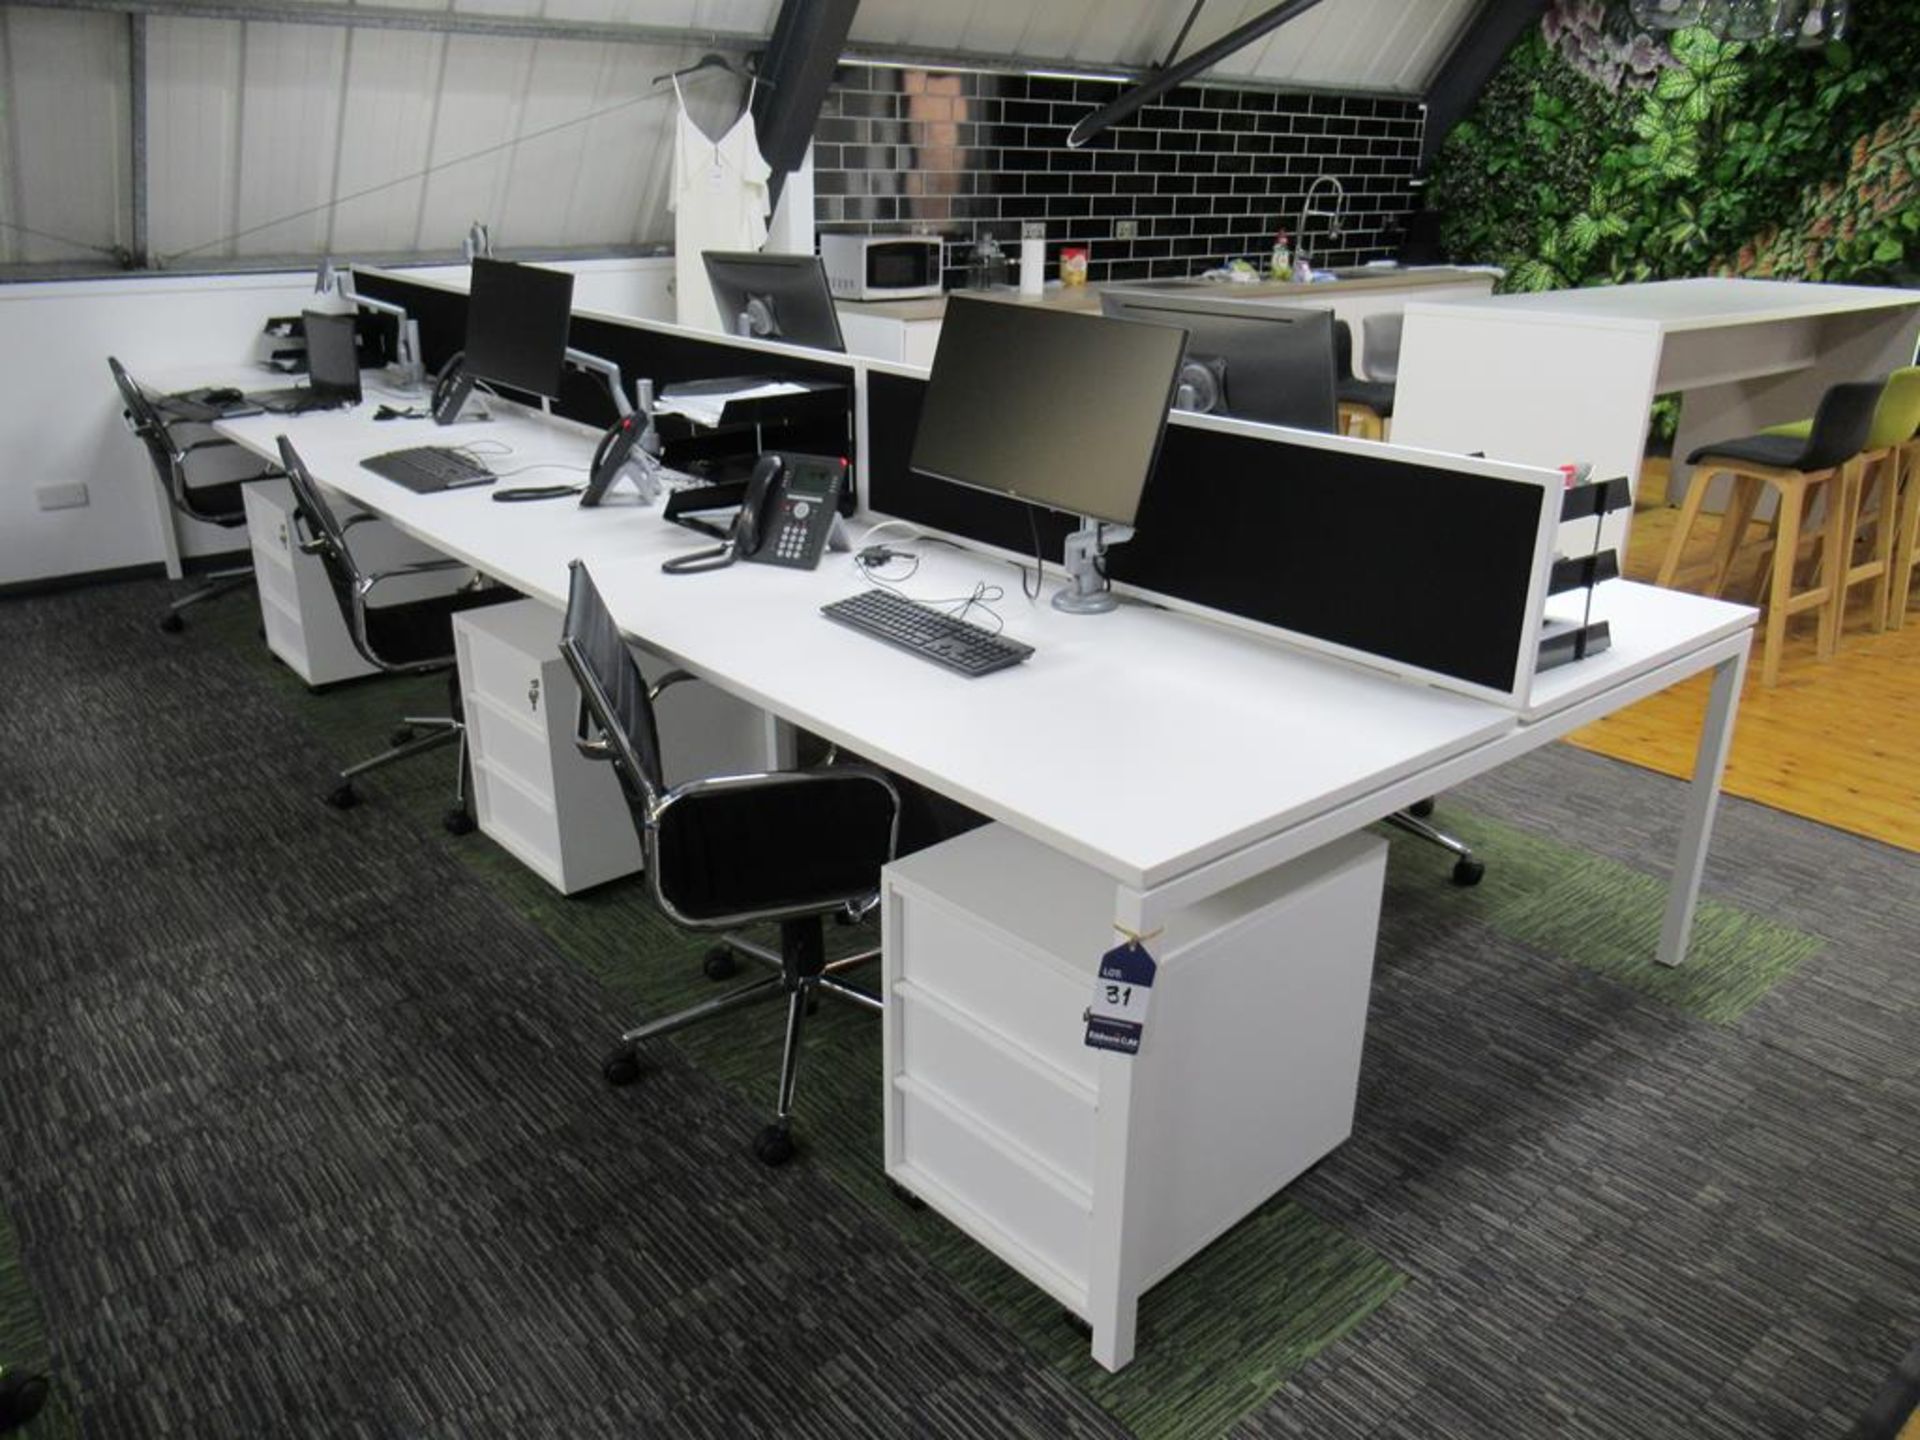 Back to Back' Office Compact Bench Desks with 6 x Mobile Office Chairs and 6 x Matching Pedestals